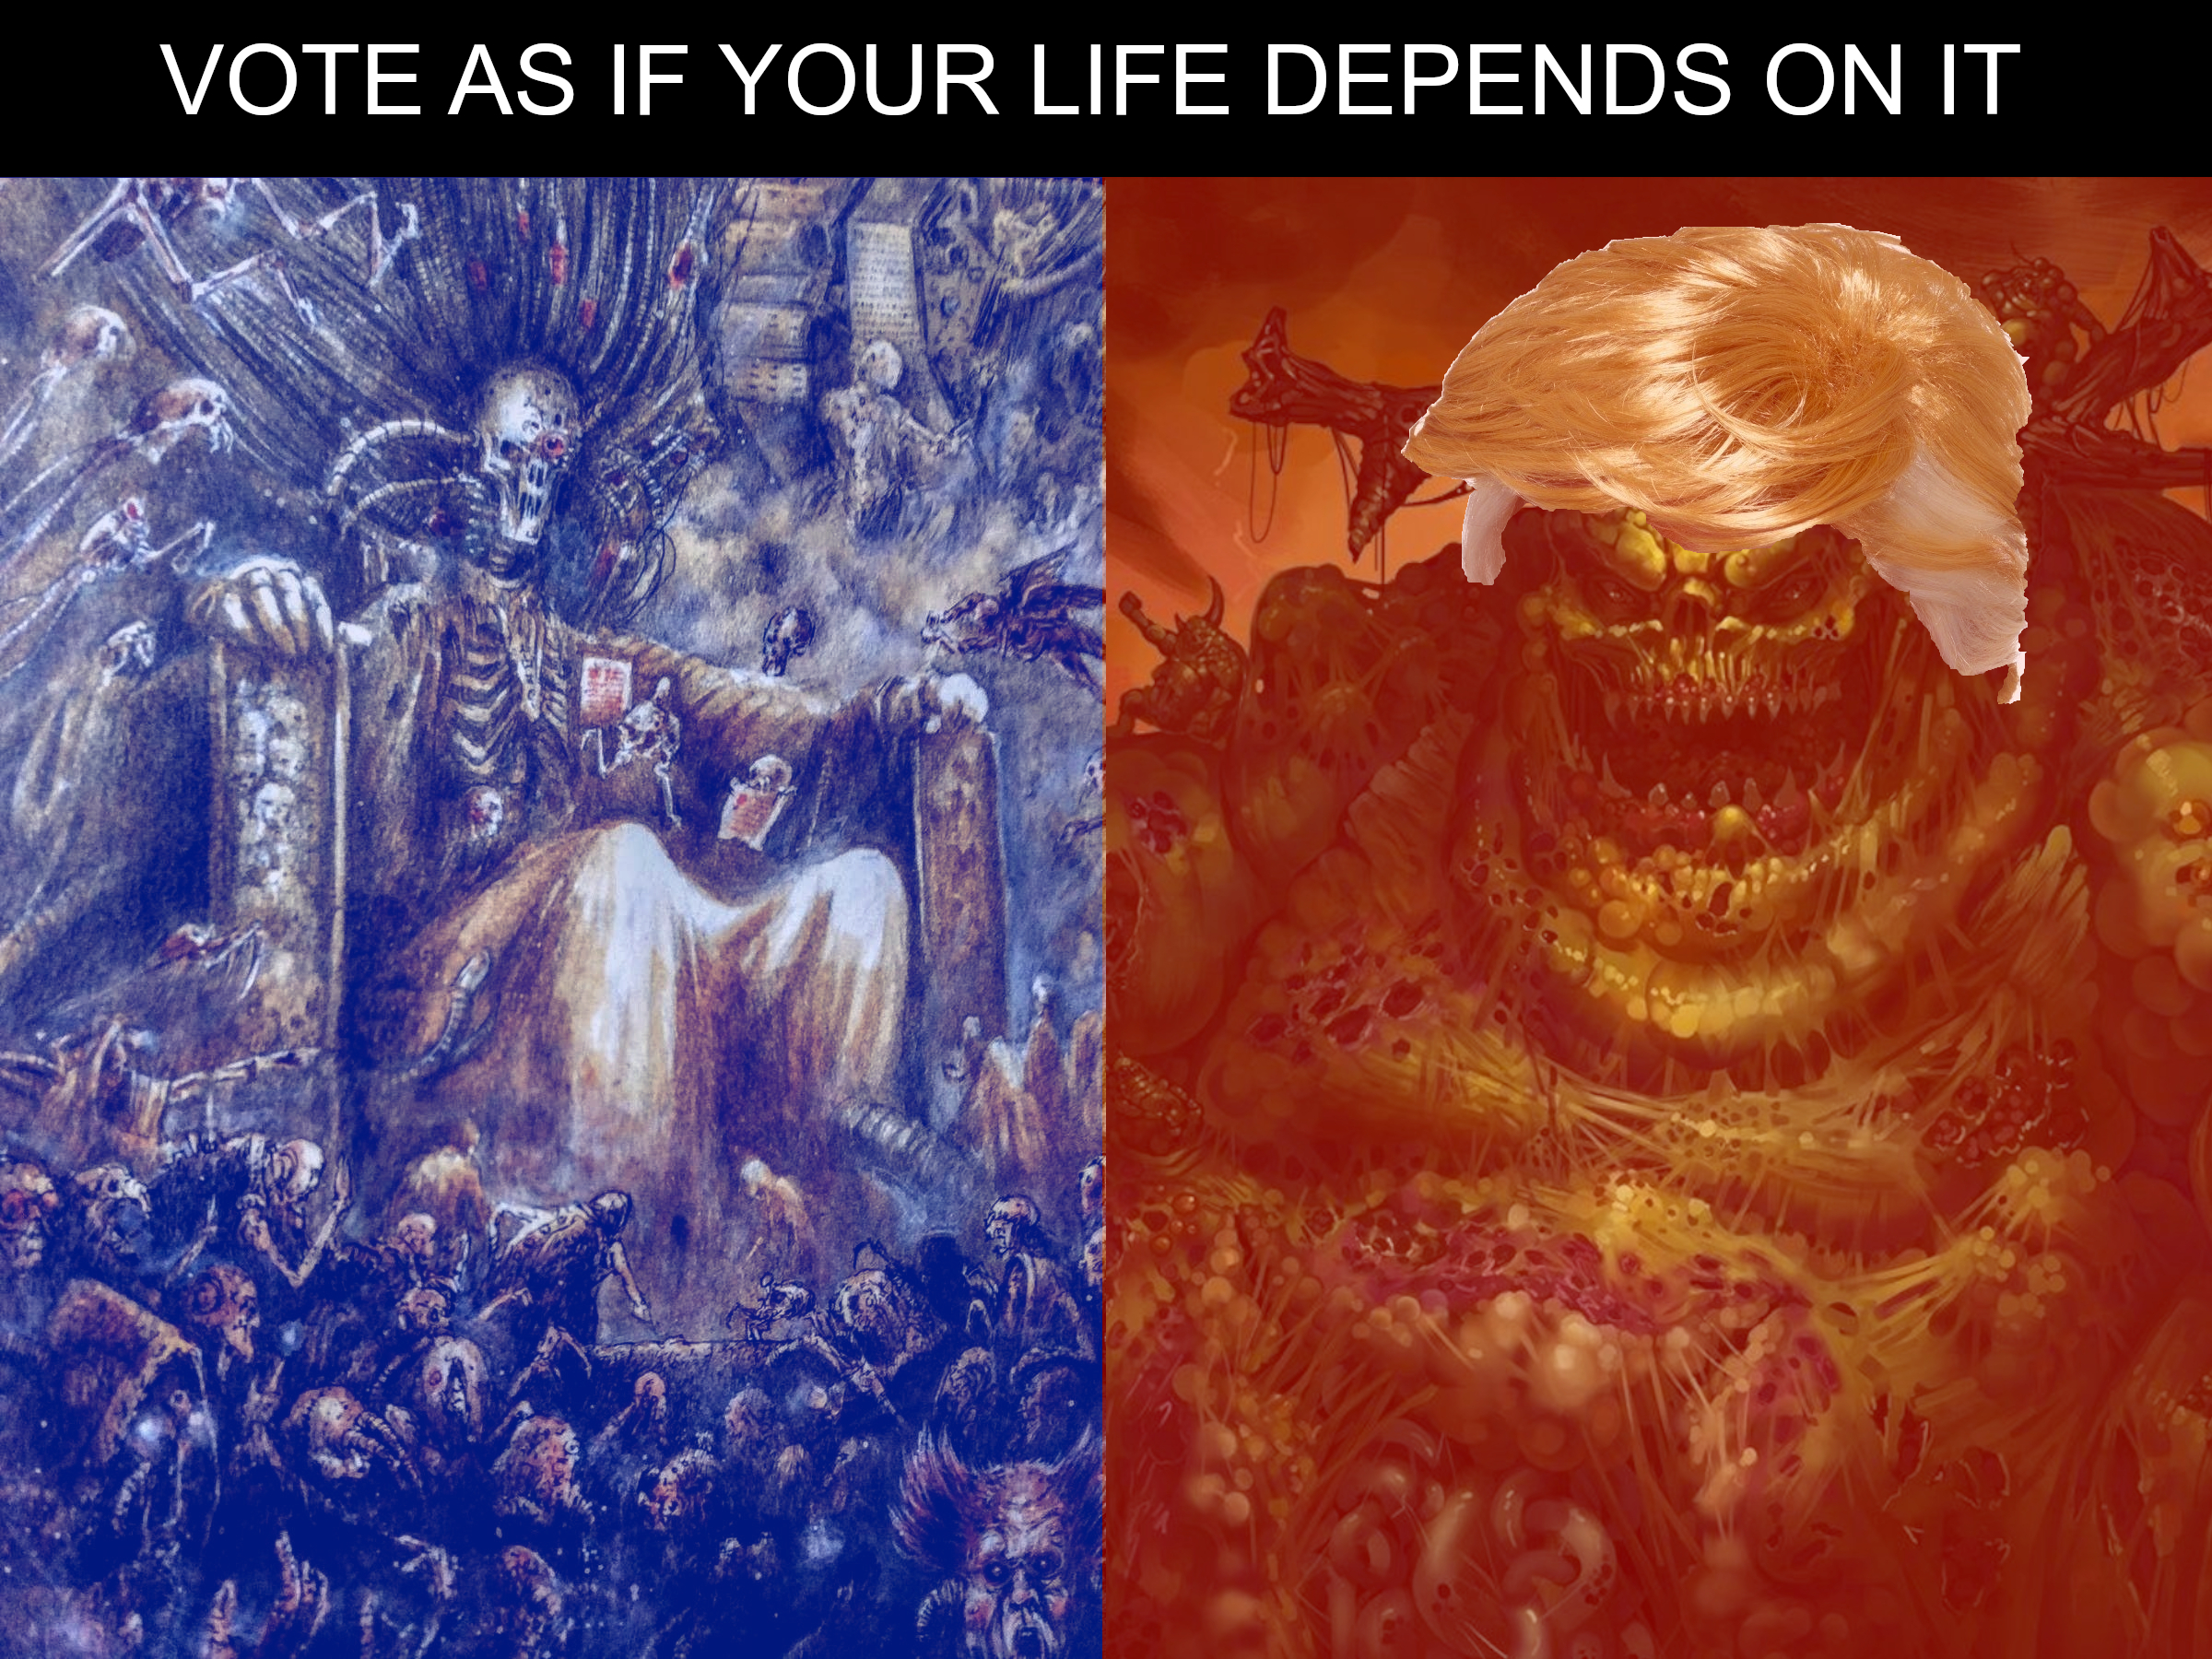 title reads "vote as if your life depends on it". It depicts the skeletonized emperor of man on the golden throne with a transparent blue overlay and the chaos god of rot, despair as well as rebirth and hope, nurgle, with a transparent red overlay and a wig in the style of trump's hair.